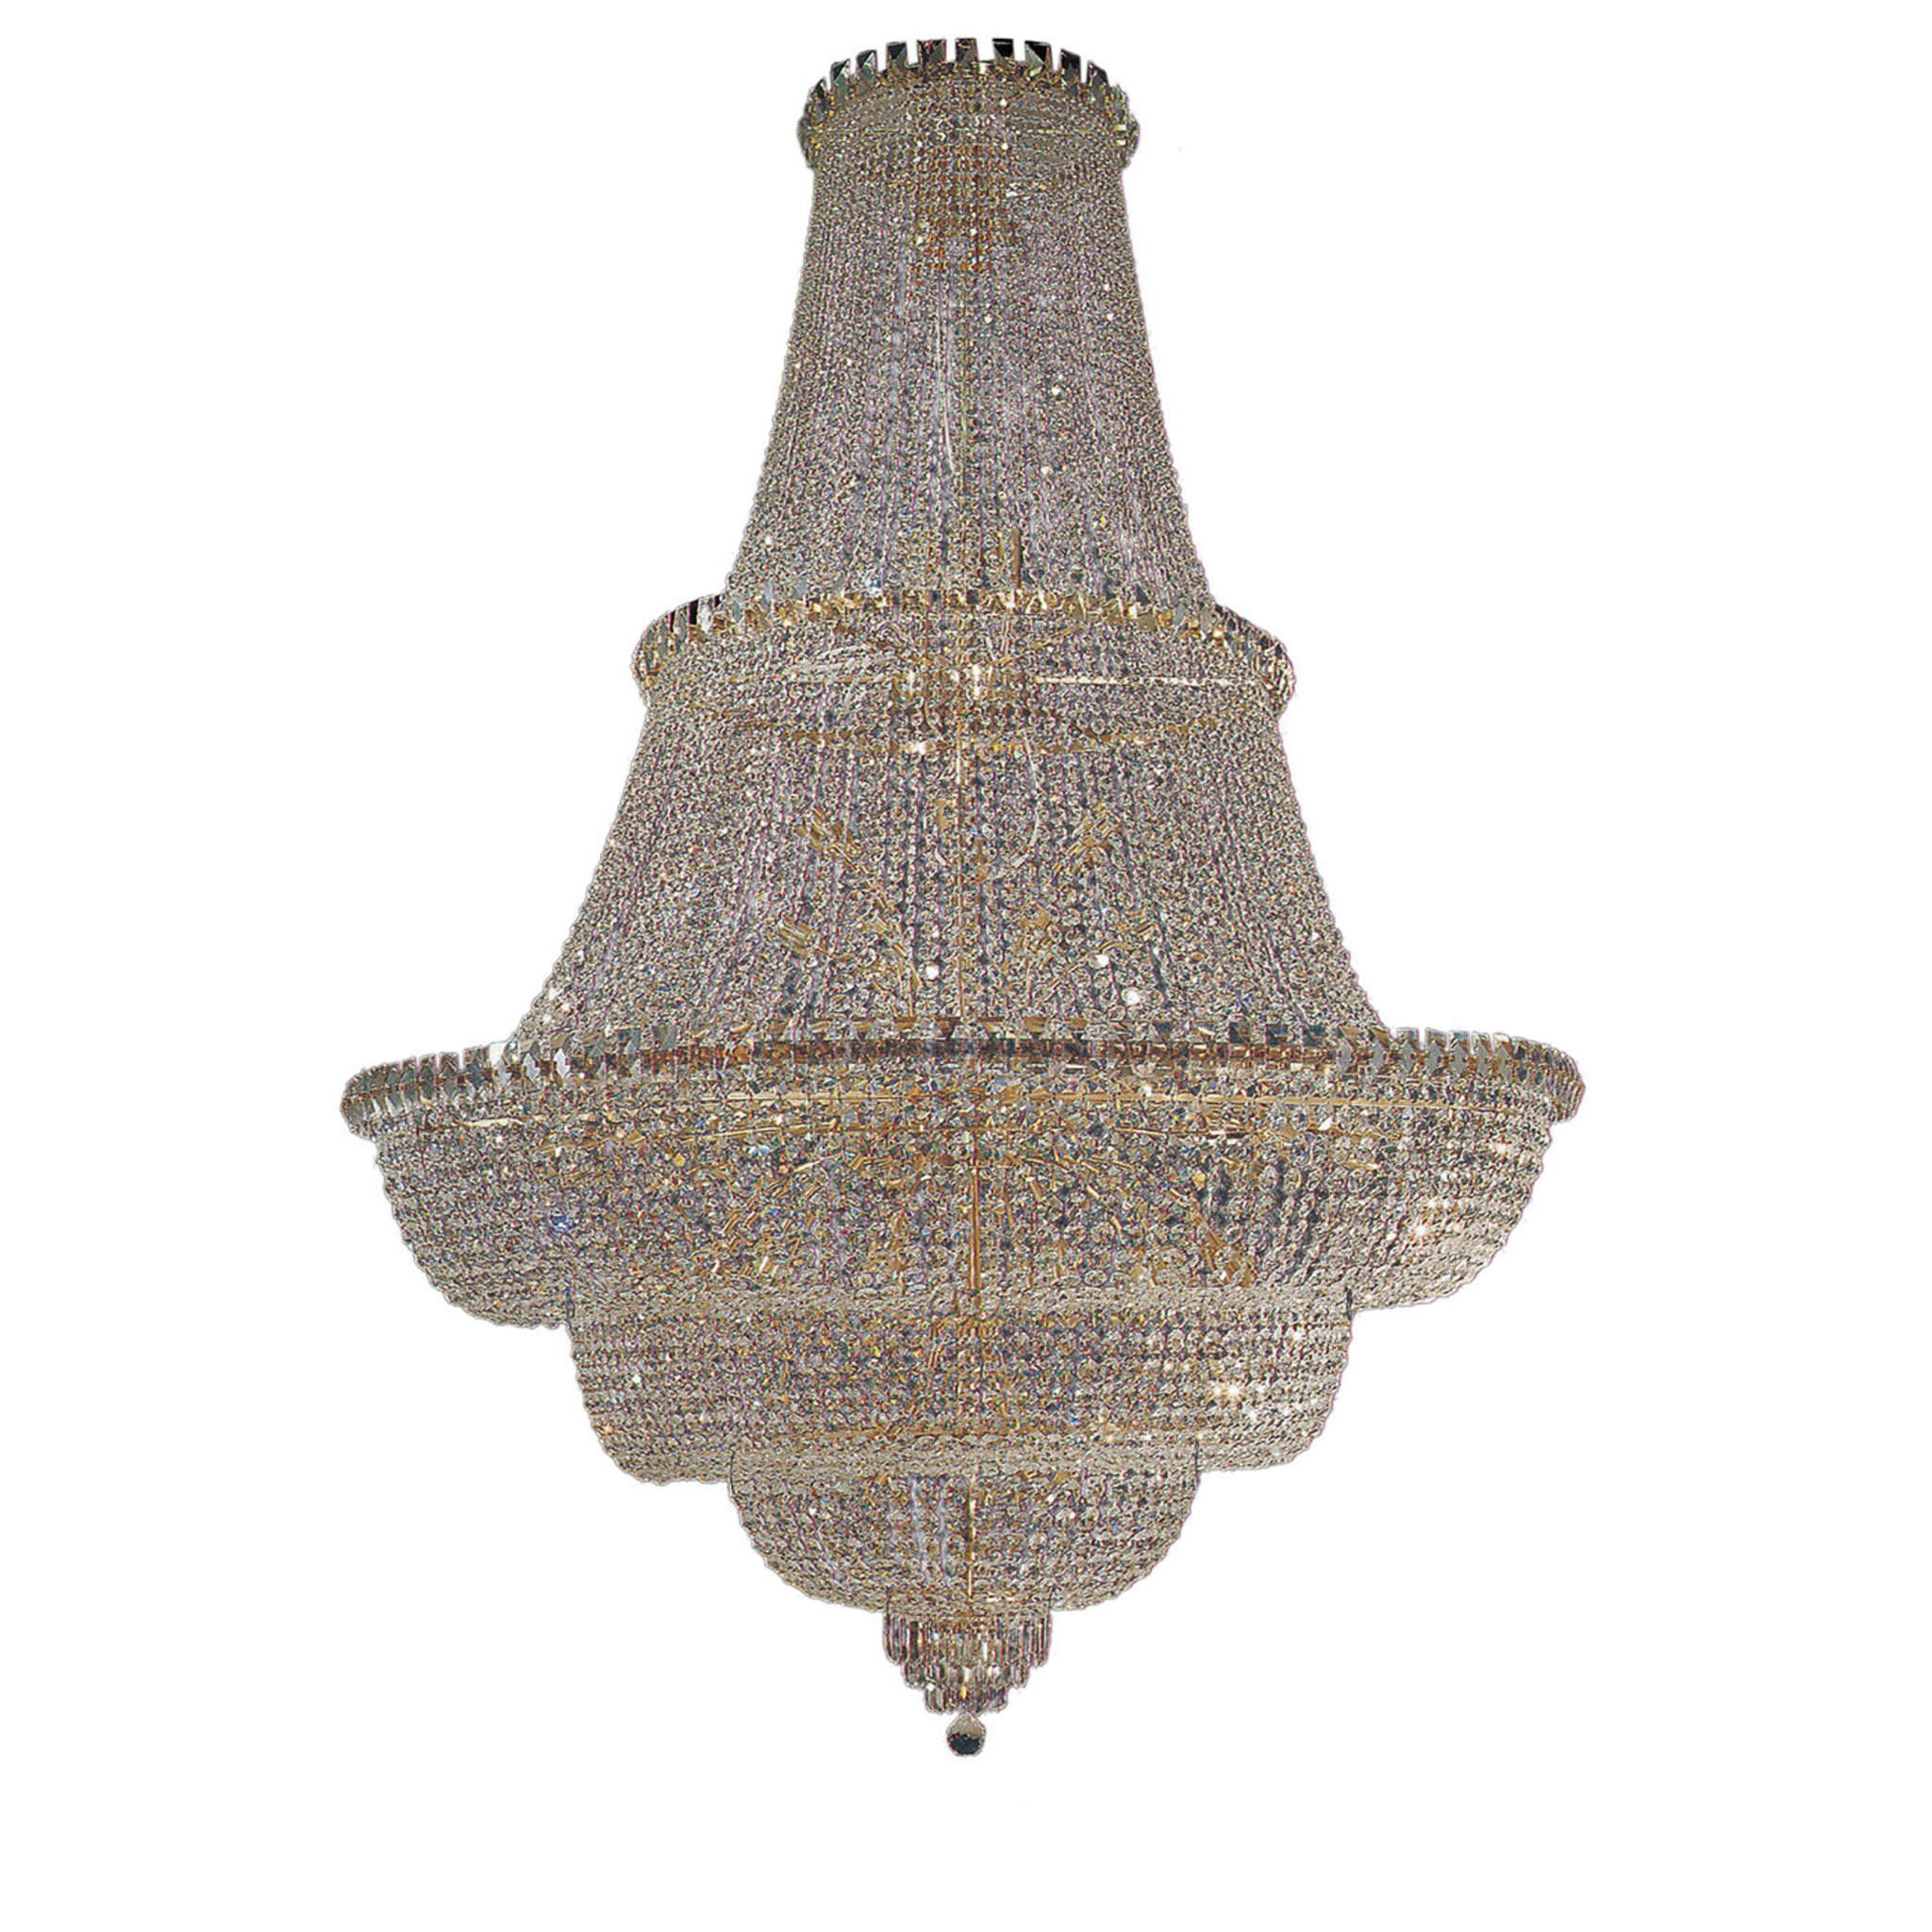 Impero 48-Light Chandelier #1 - Main view